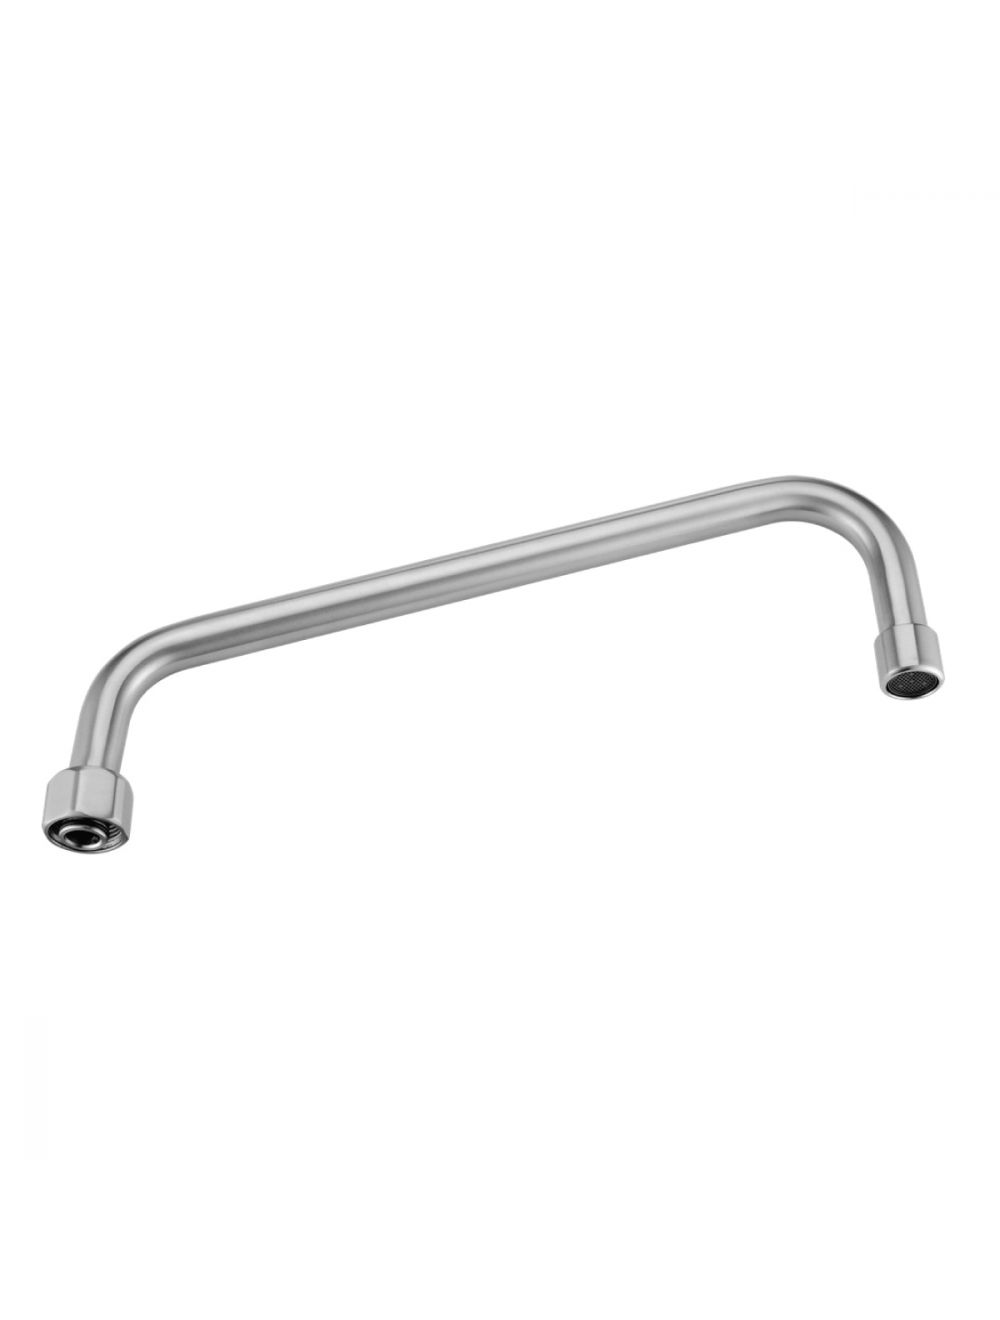 Stainless Steel Standard 12" Spout Only Including Aerator